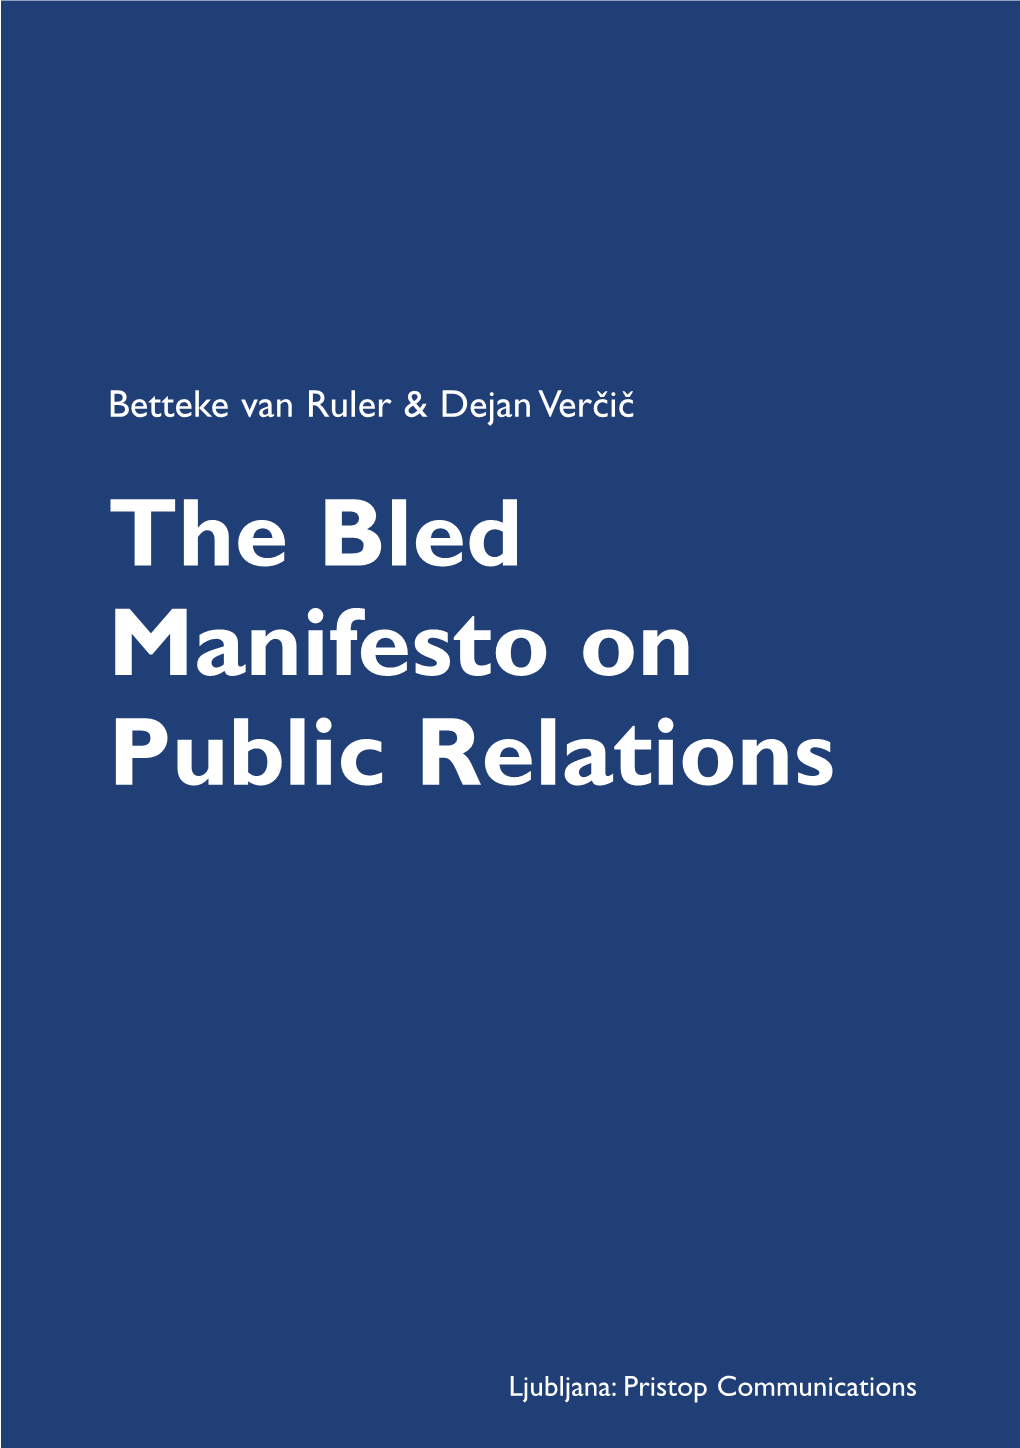 The Bled Manifesto on Public Relations